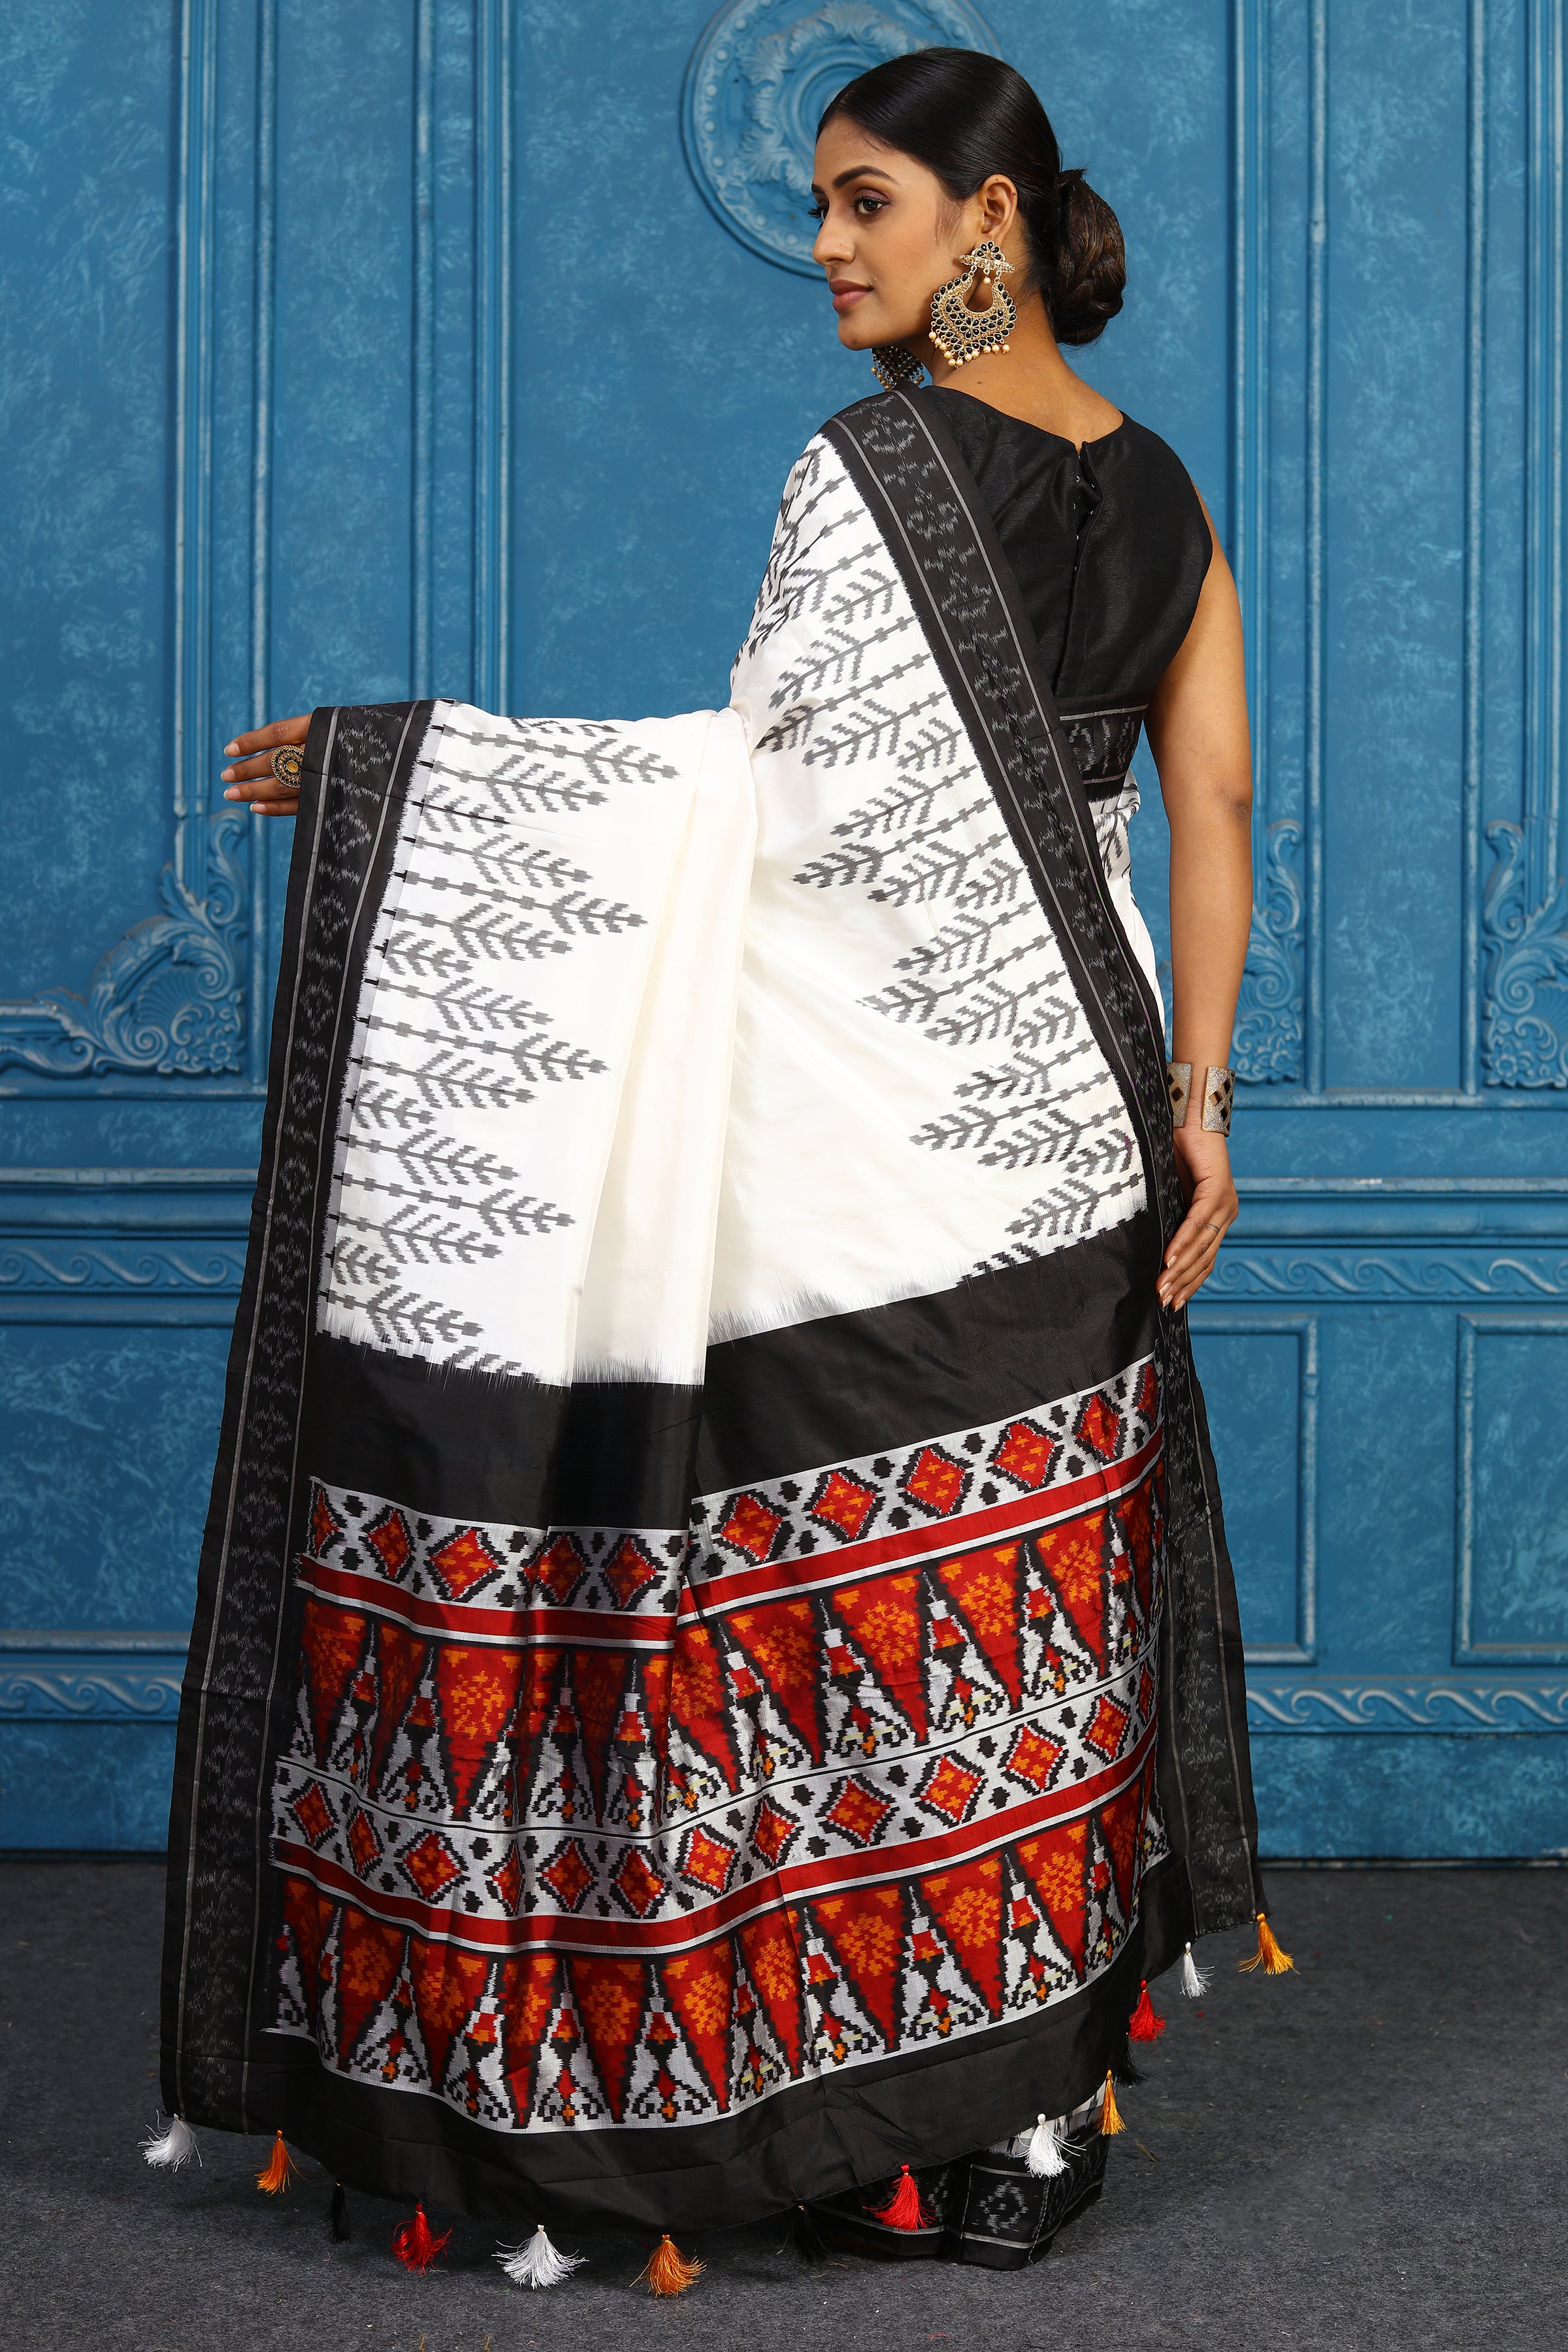 Buy off-white pochampally silk ikkat sari online in USA with black border. Look your best on festive occasions in latest designer sarees, pure silk sarees, Kanchipuram sarees, handwoven sarees, tussar silk sarees, embroidered sarees from Pure Elegance Indian clothing store in USA.-back